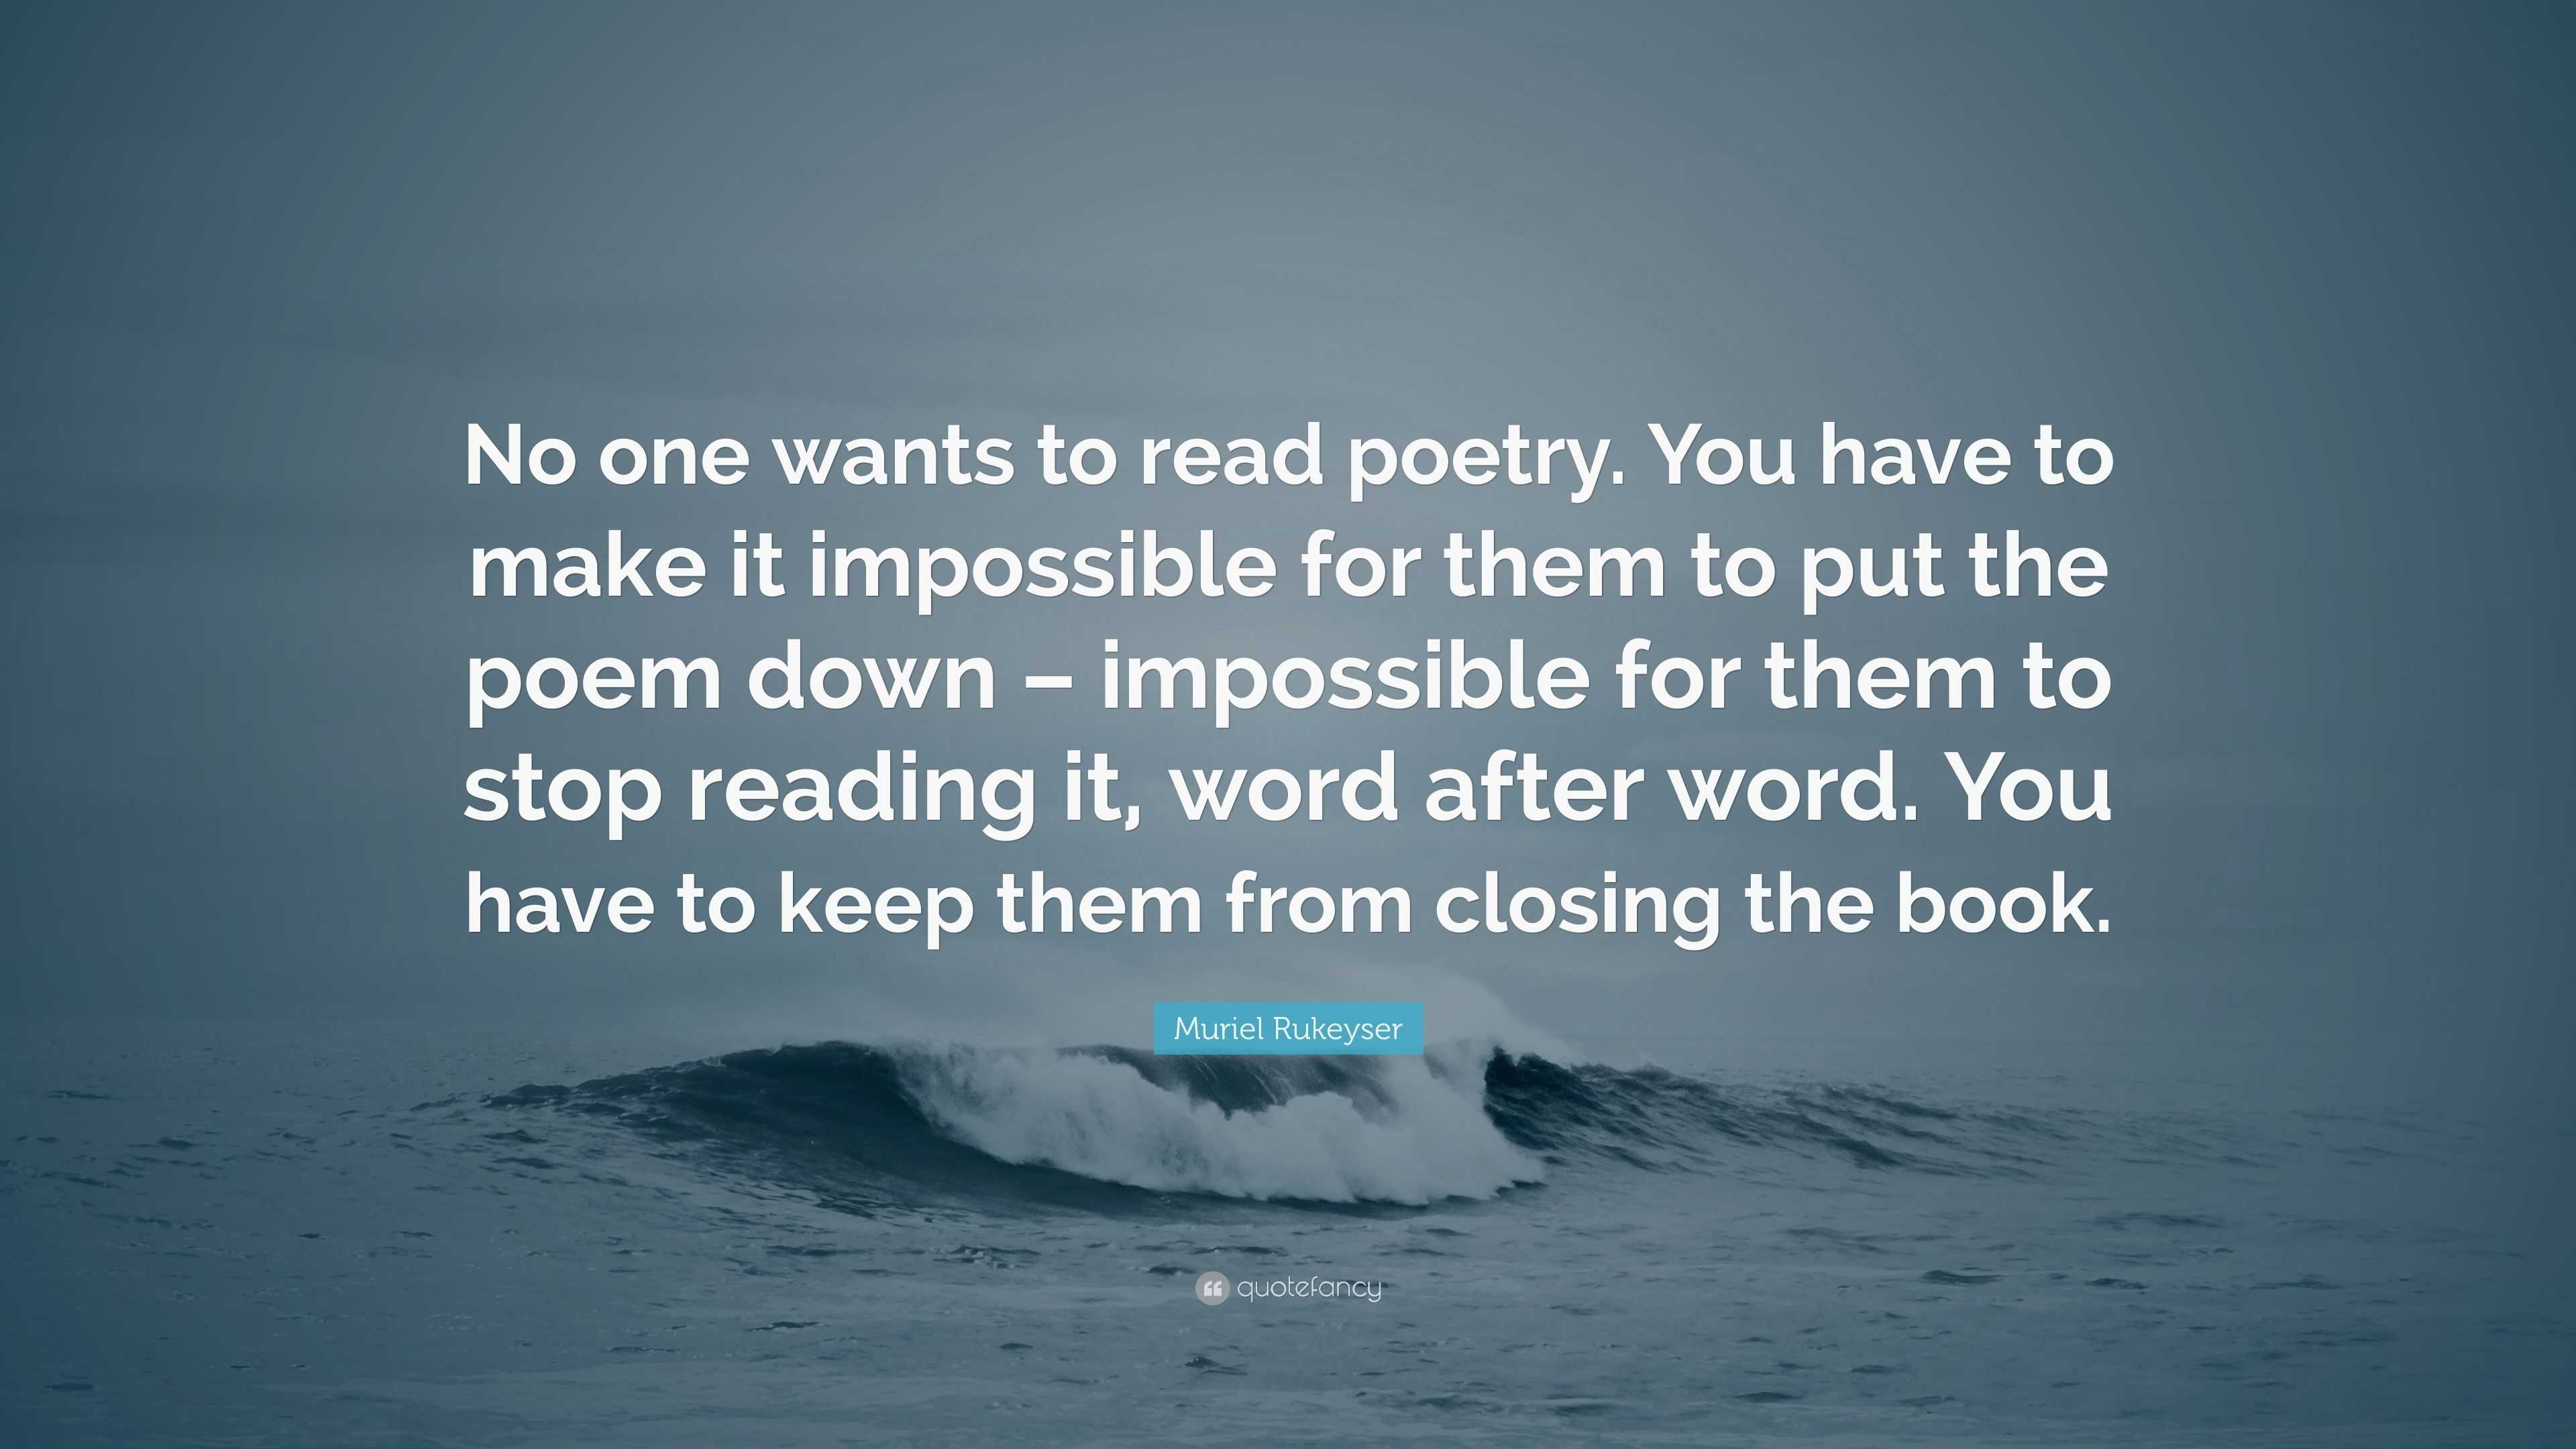 Muriel Rukeyser Quote: “No one wants to read poetry. You have to make ...